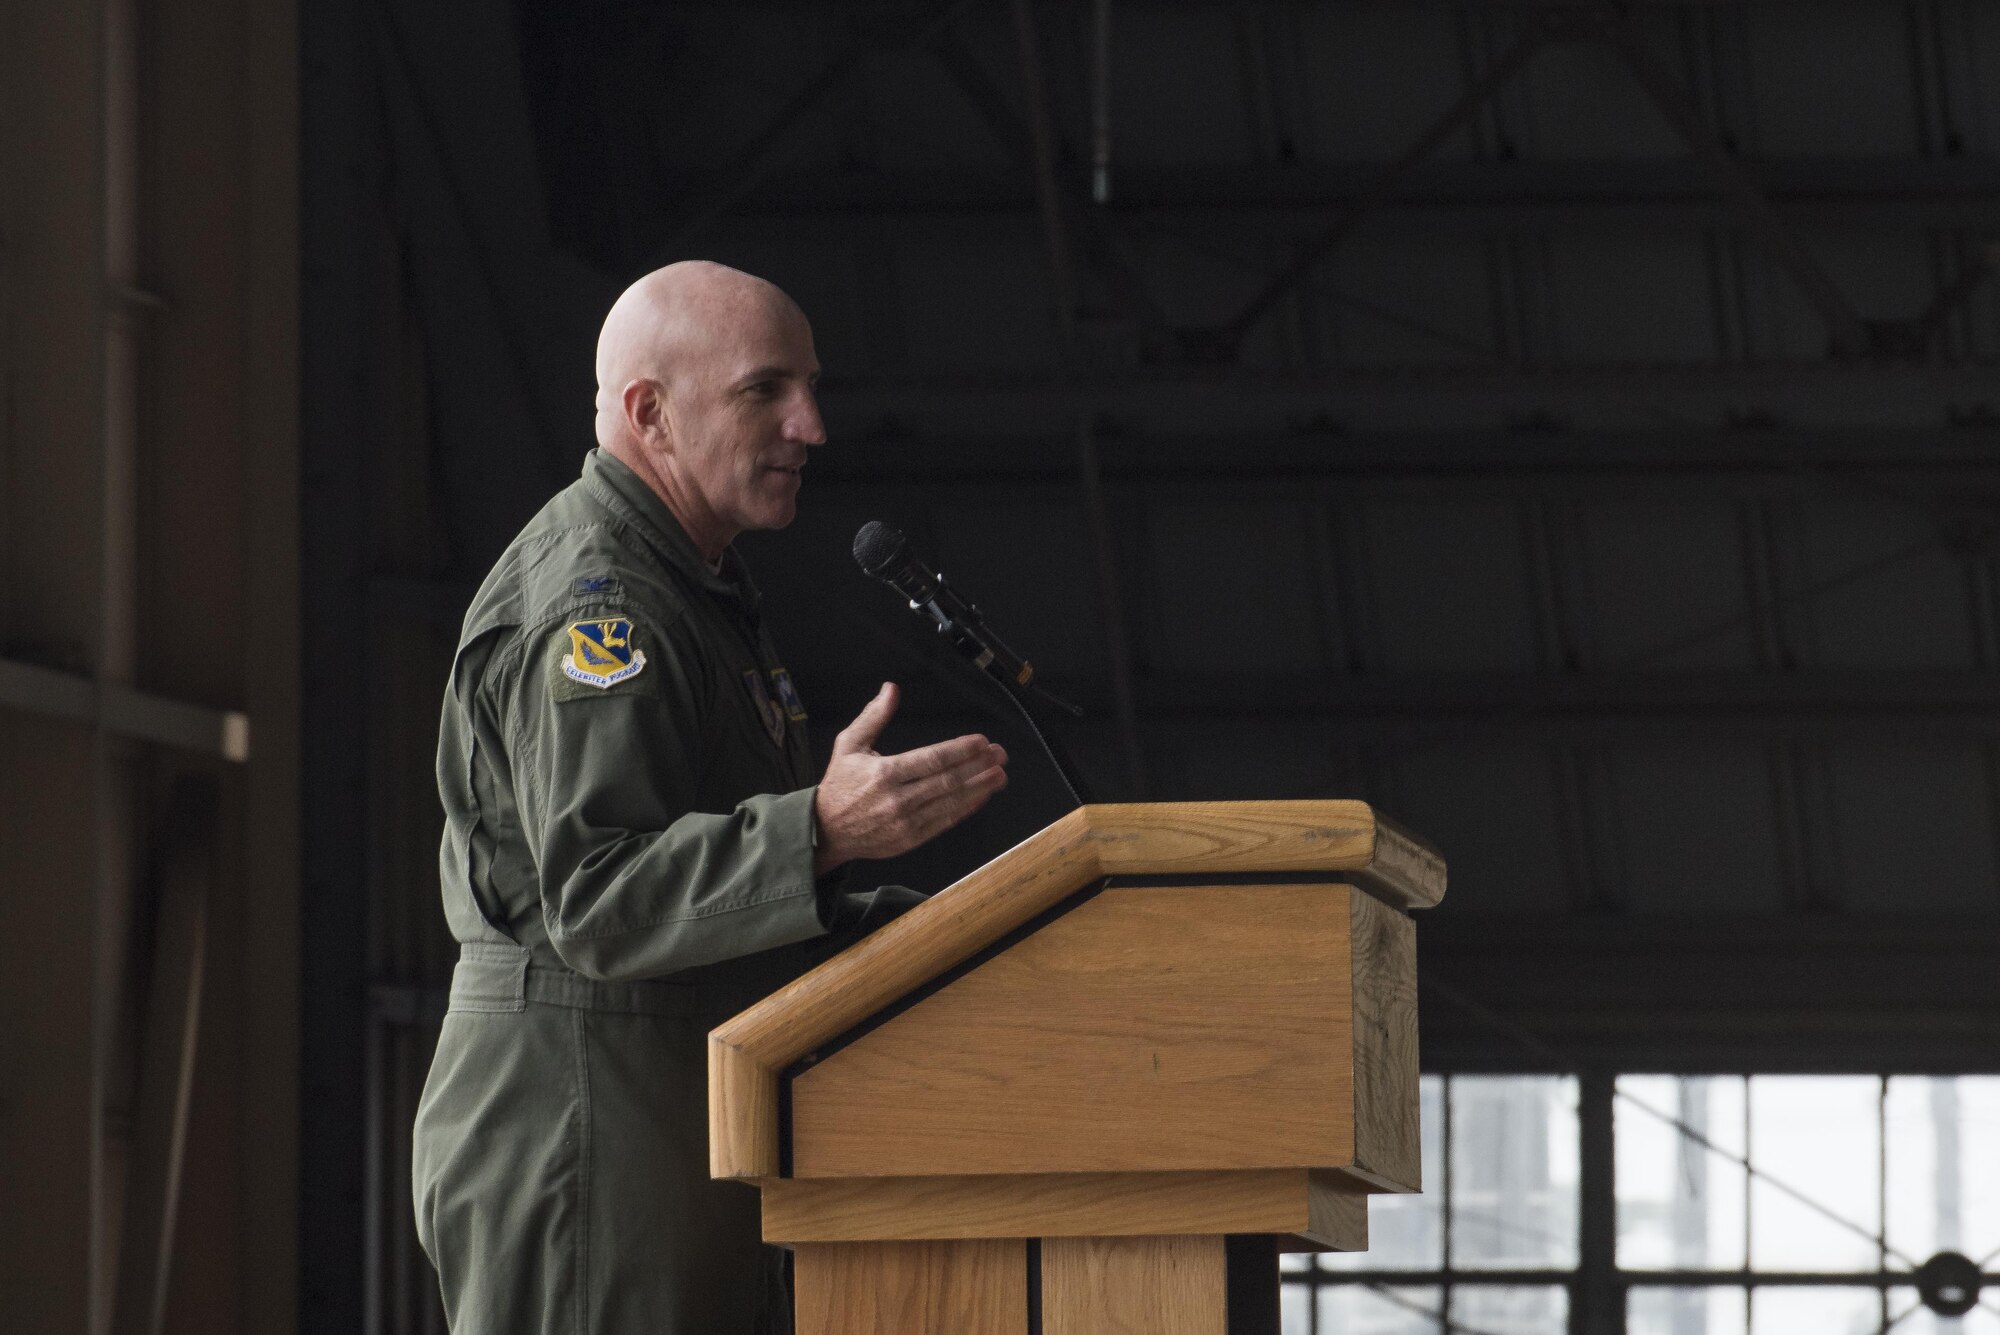 Col. Kenneth Moss, 374th Airlift Wing commander, speaks during the official C-130H Hercules Farewell Ceremony at Yokota Air Base, Japan, Oct. 16, 2017.